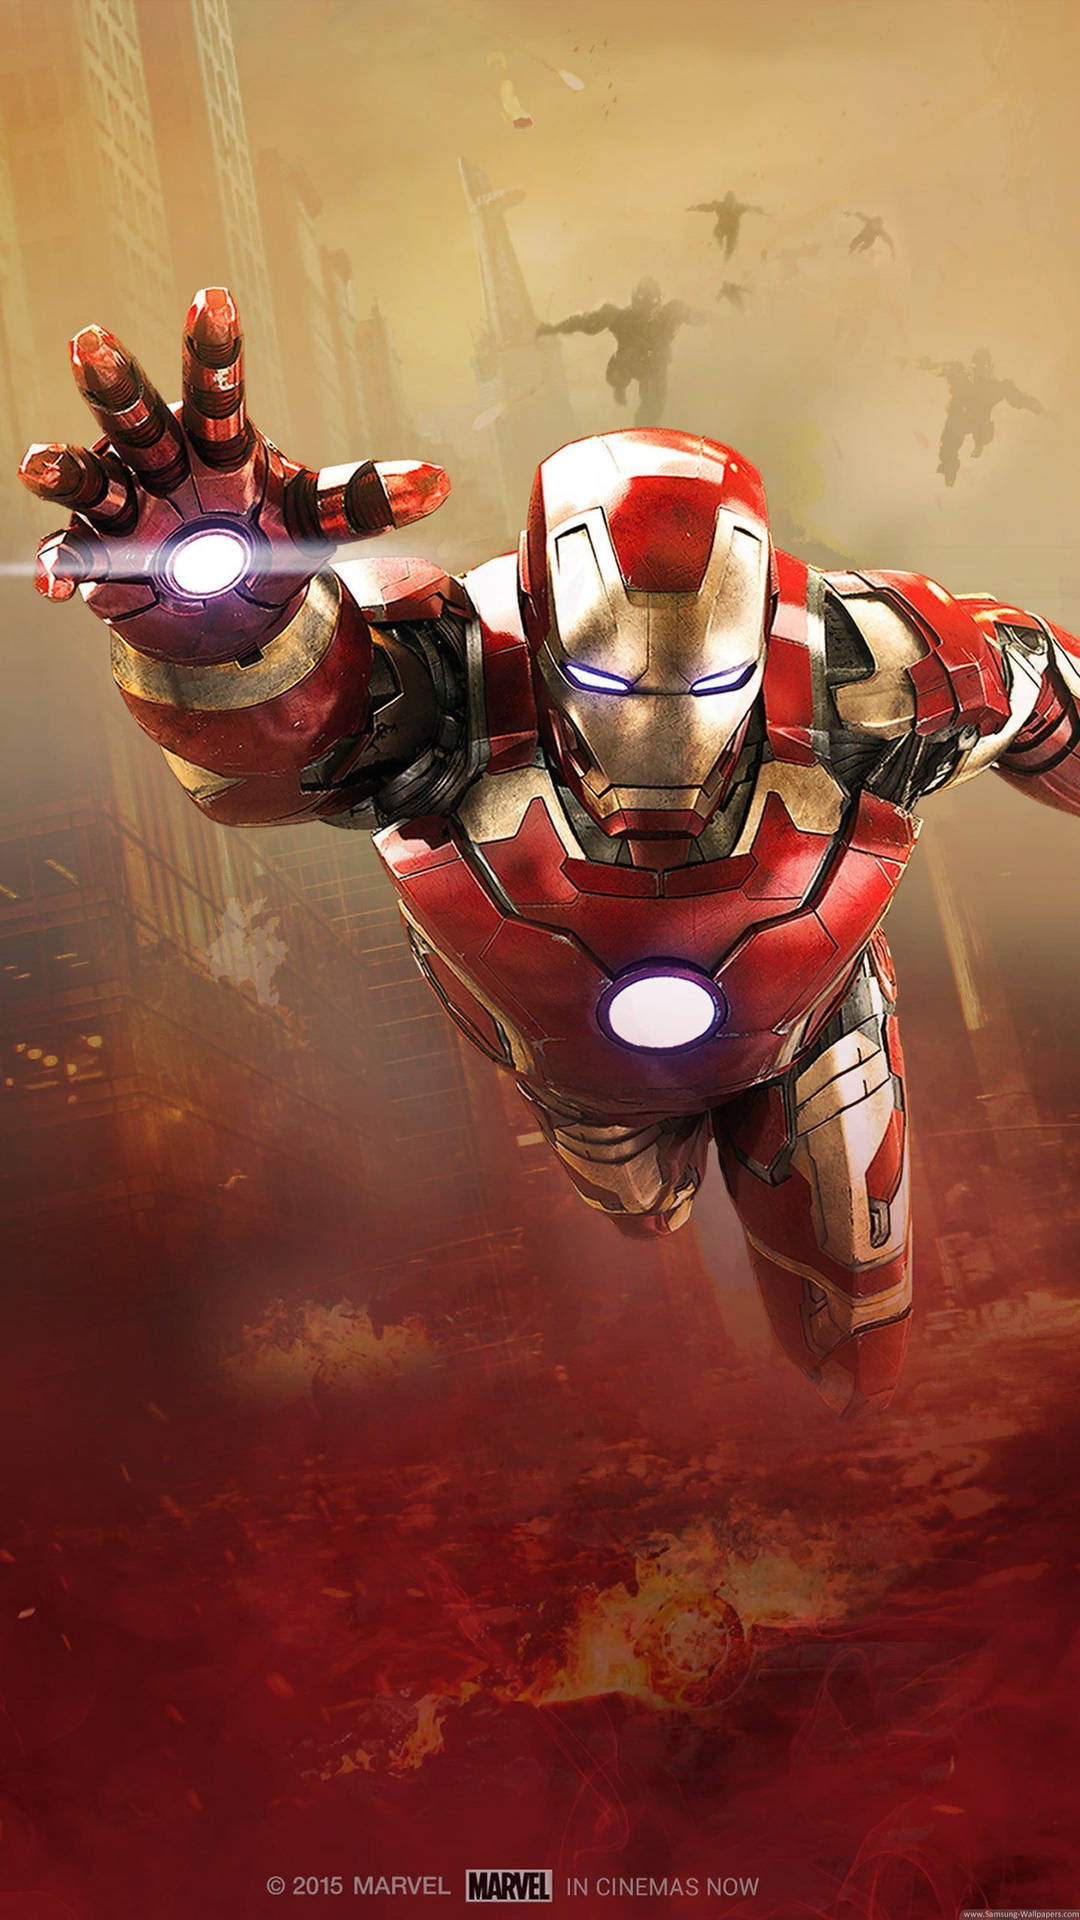 Marvel's Iron Man Android Wallpaper